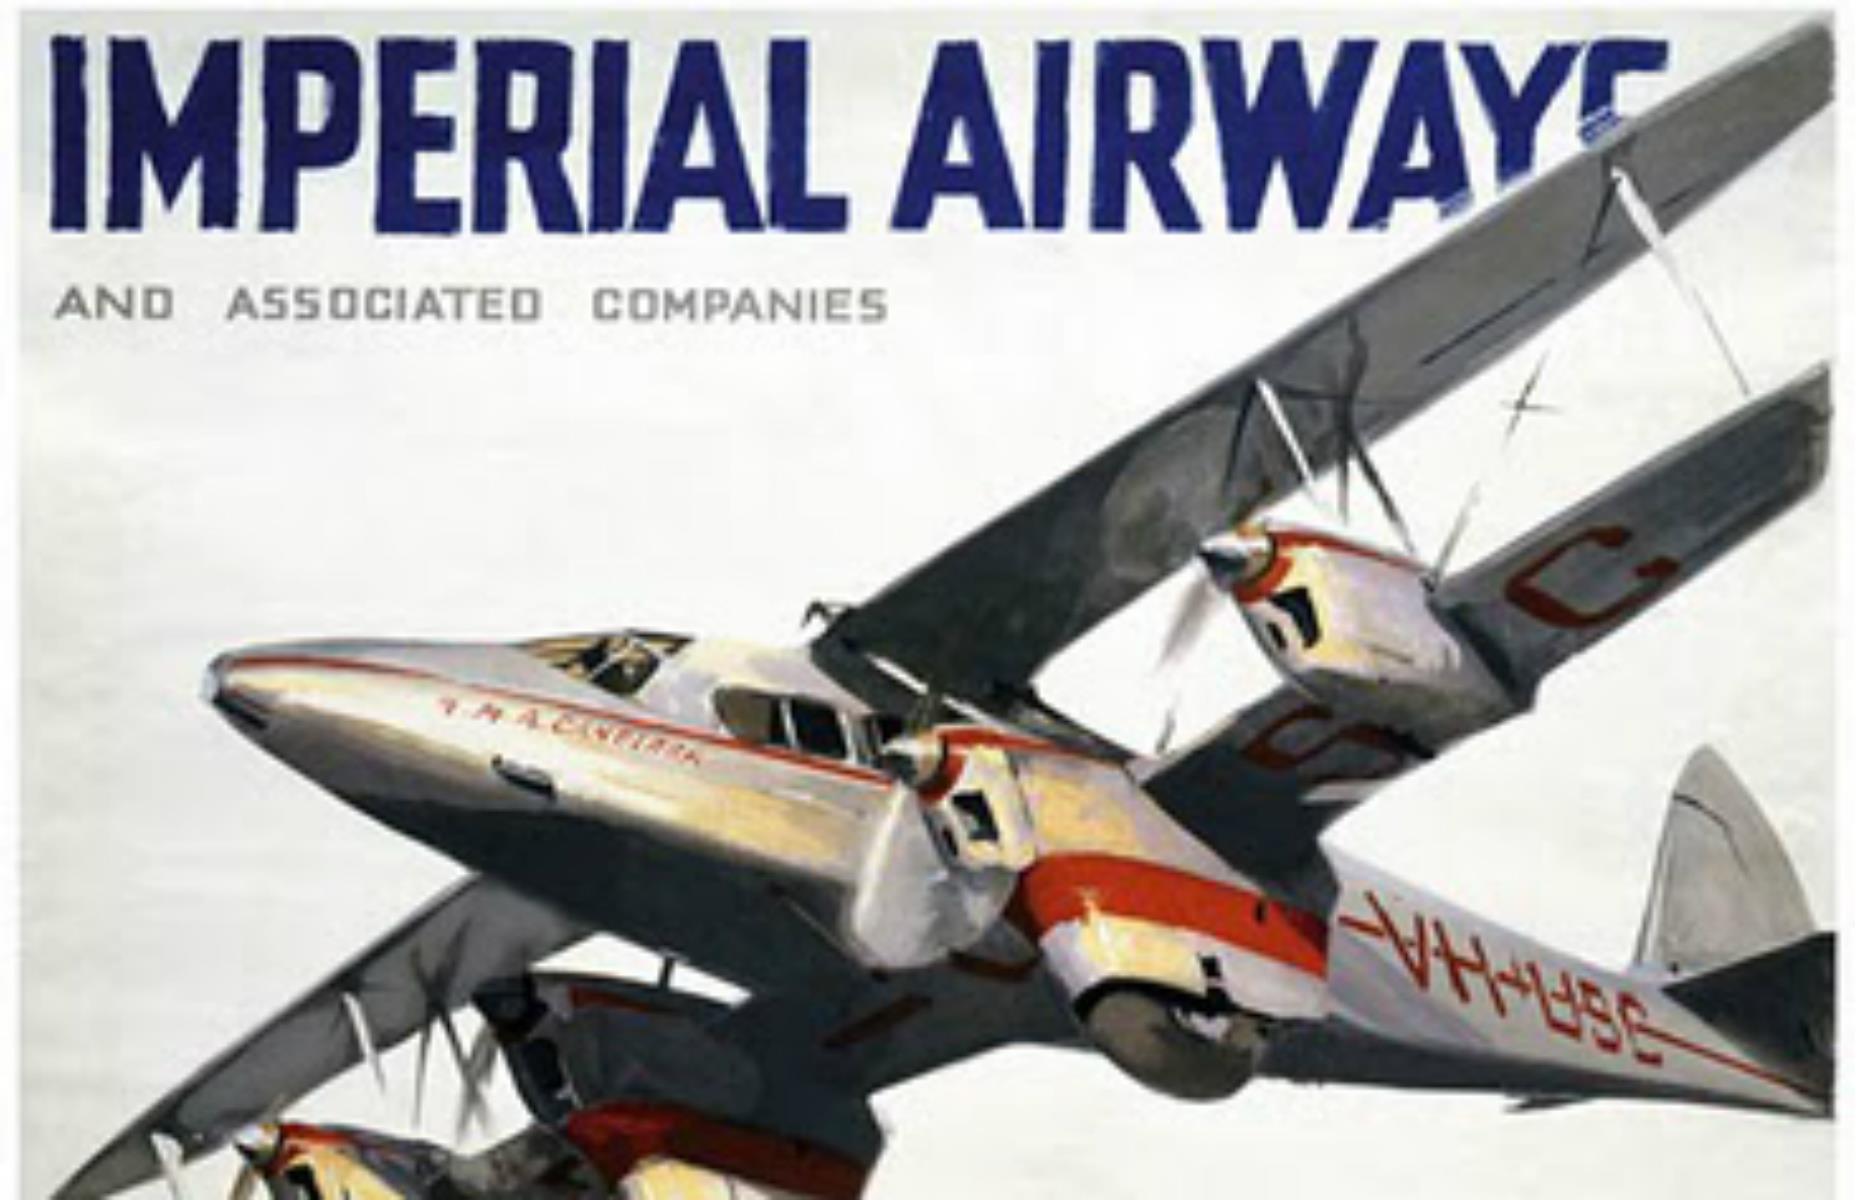 <p>In the 1920s, the focus was on cold food as energy had to be preserved for the engine. Meals were presented in wicker baskets, with options typically including dishes like cold chicken, fruit salads, sandwiches, lobster salads and cheese selections. On airlines such as Imperial Airways, (British Airways’ predecessor), these might also have included ox tongue, foie gras and peaches.</p>